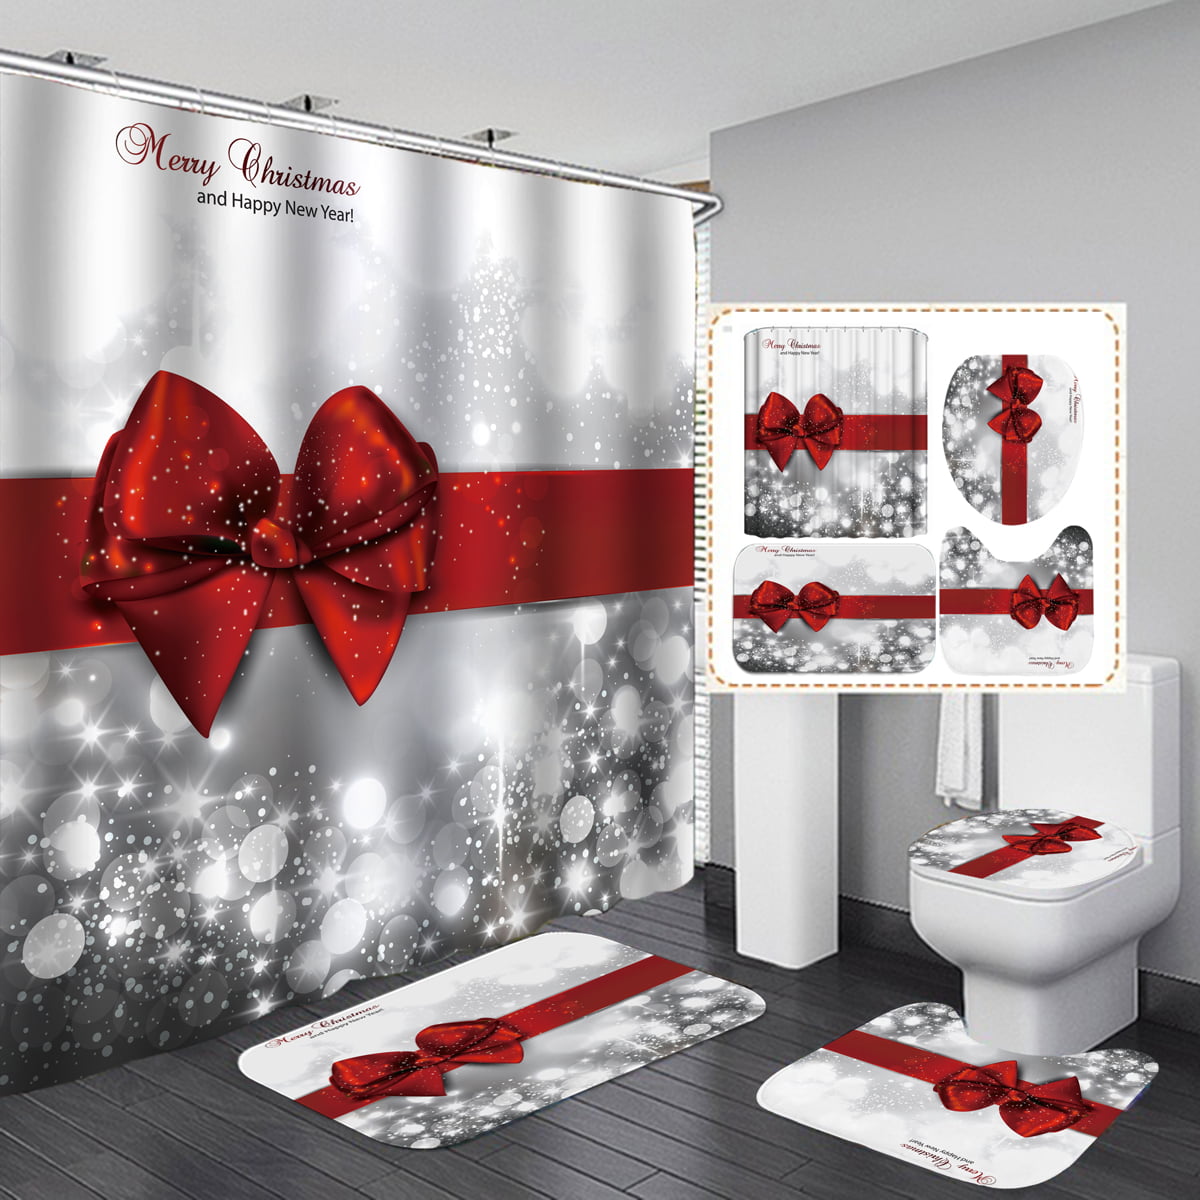 180x180cm Silver Shower Curtain Christmas Red Bow Knot Bathroom and 3